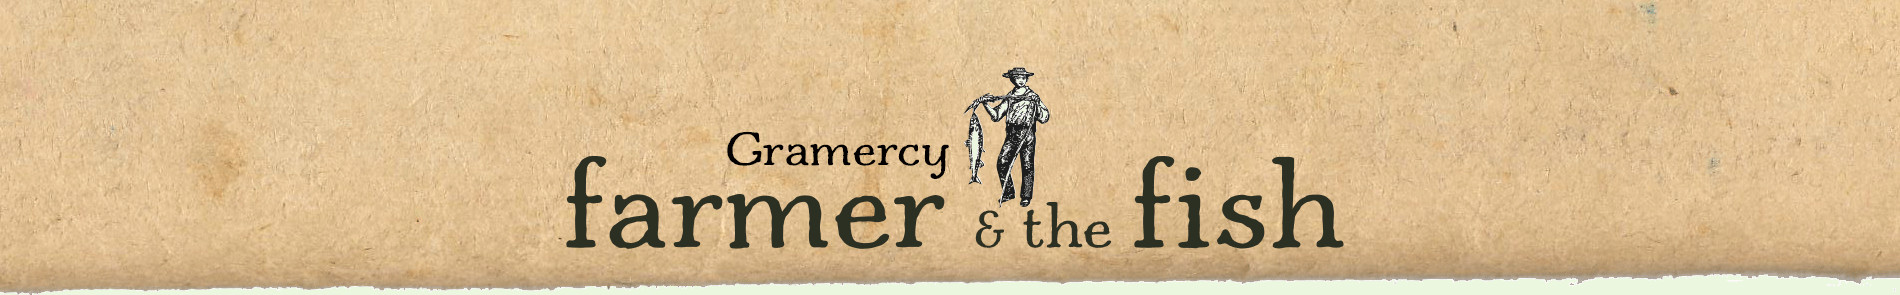 Farmer and the Fish logo on antique paper background